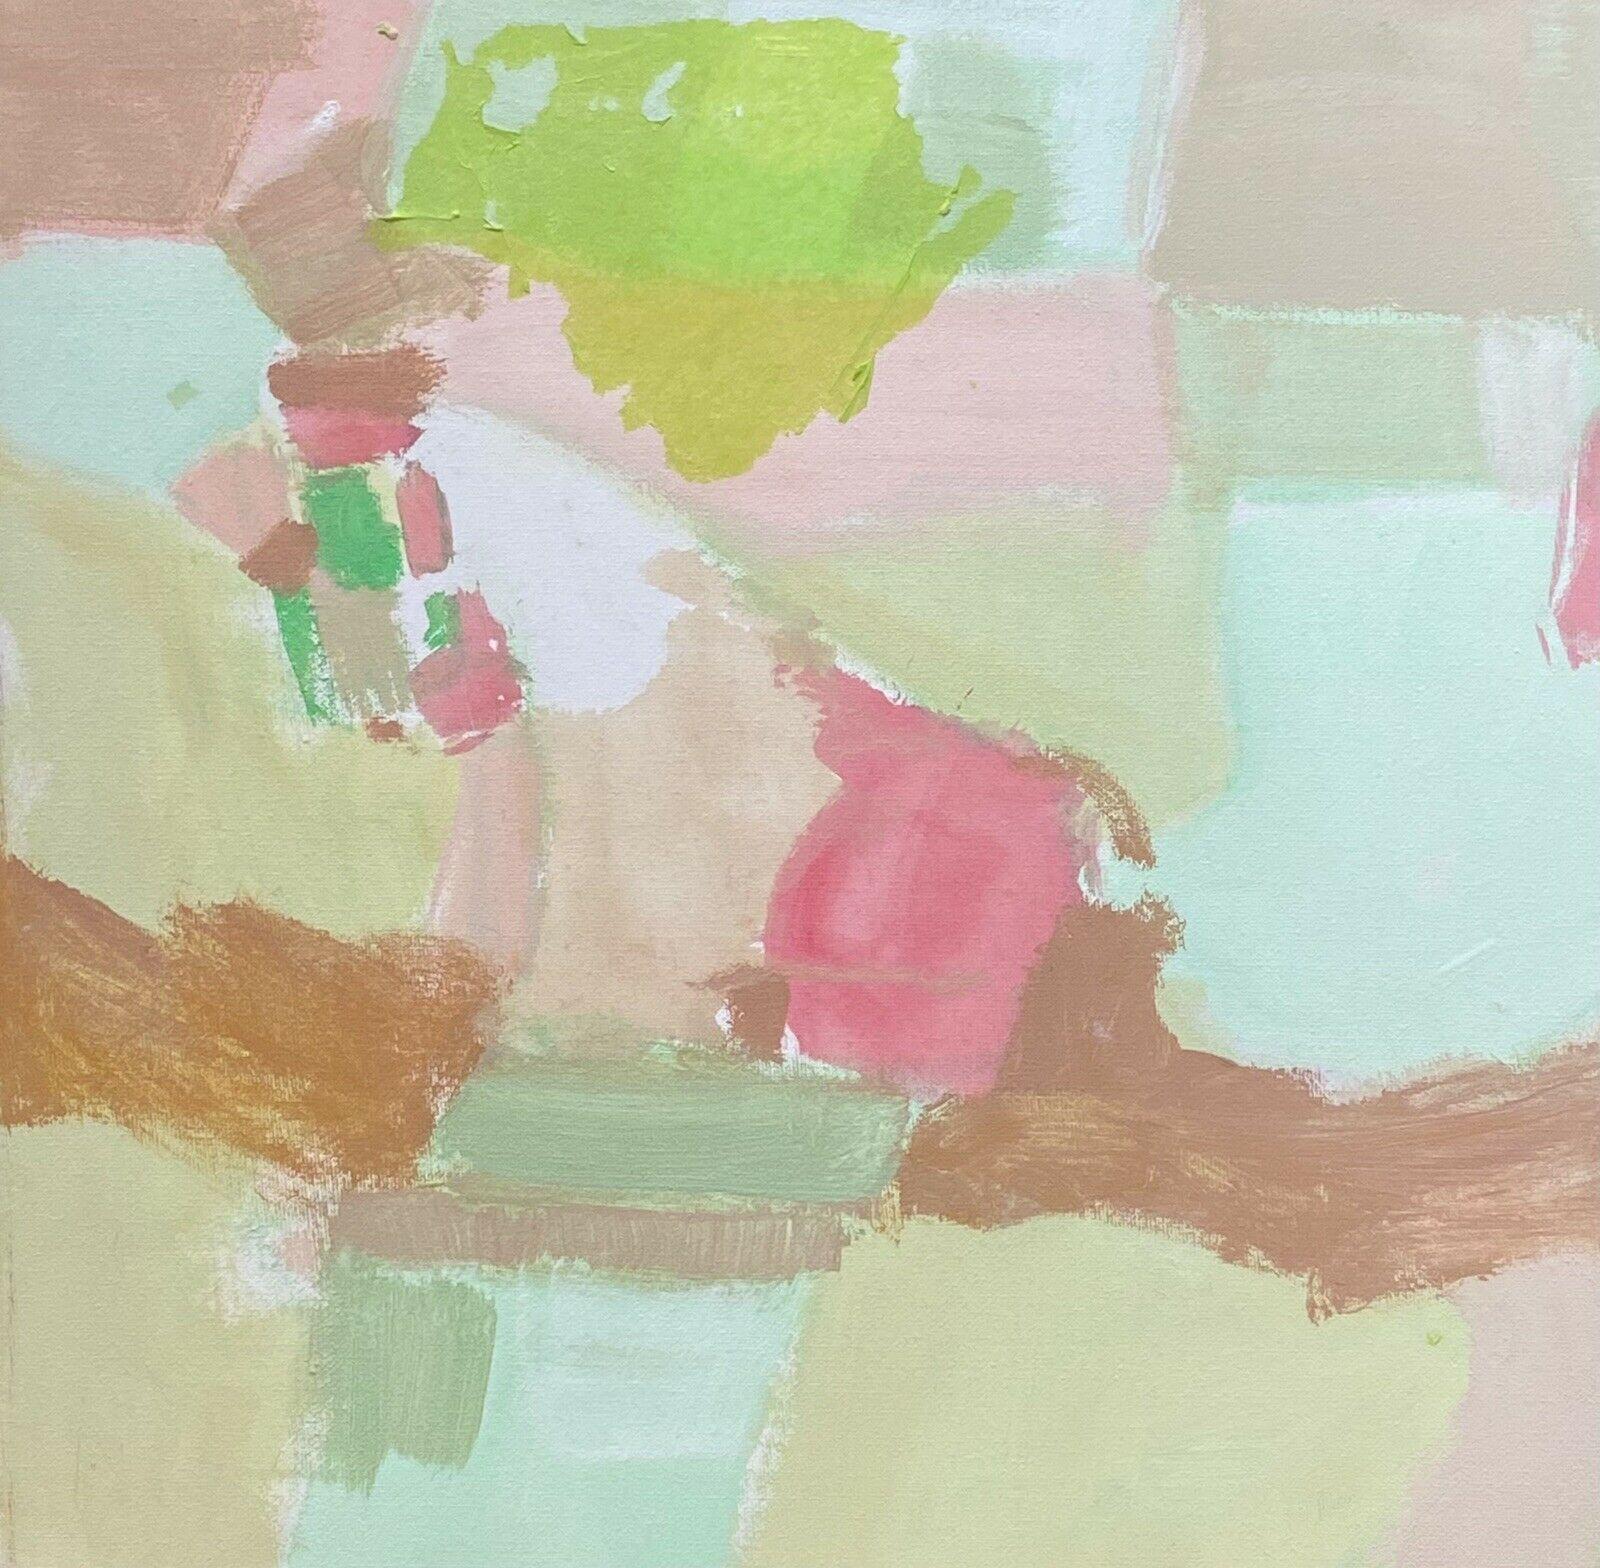 R.Leroy Abstract Painting - PASTEL PINKS & GREEN COLORS - FRENCH CONTEMPORARY ABSTRACT CUBIST PAINTING